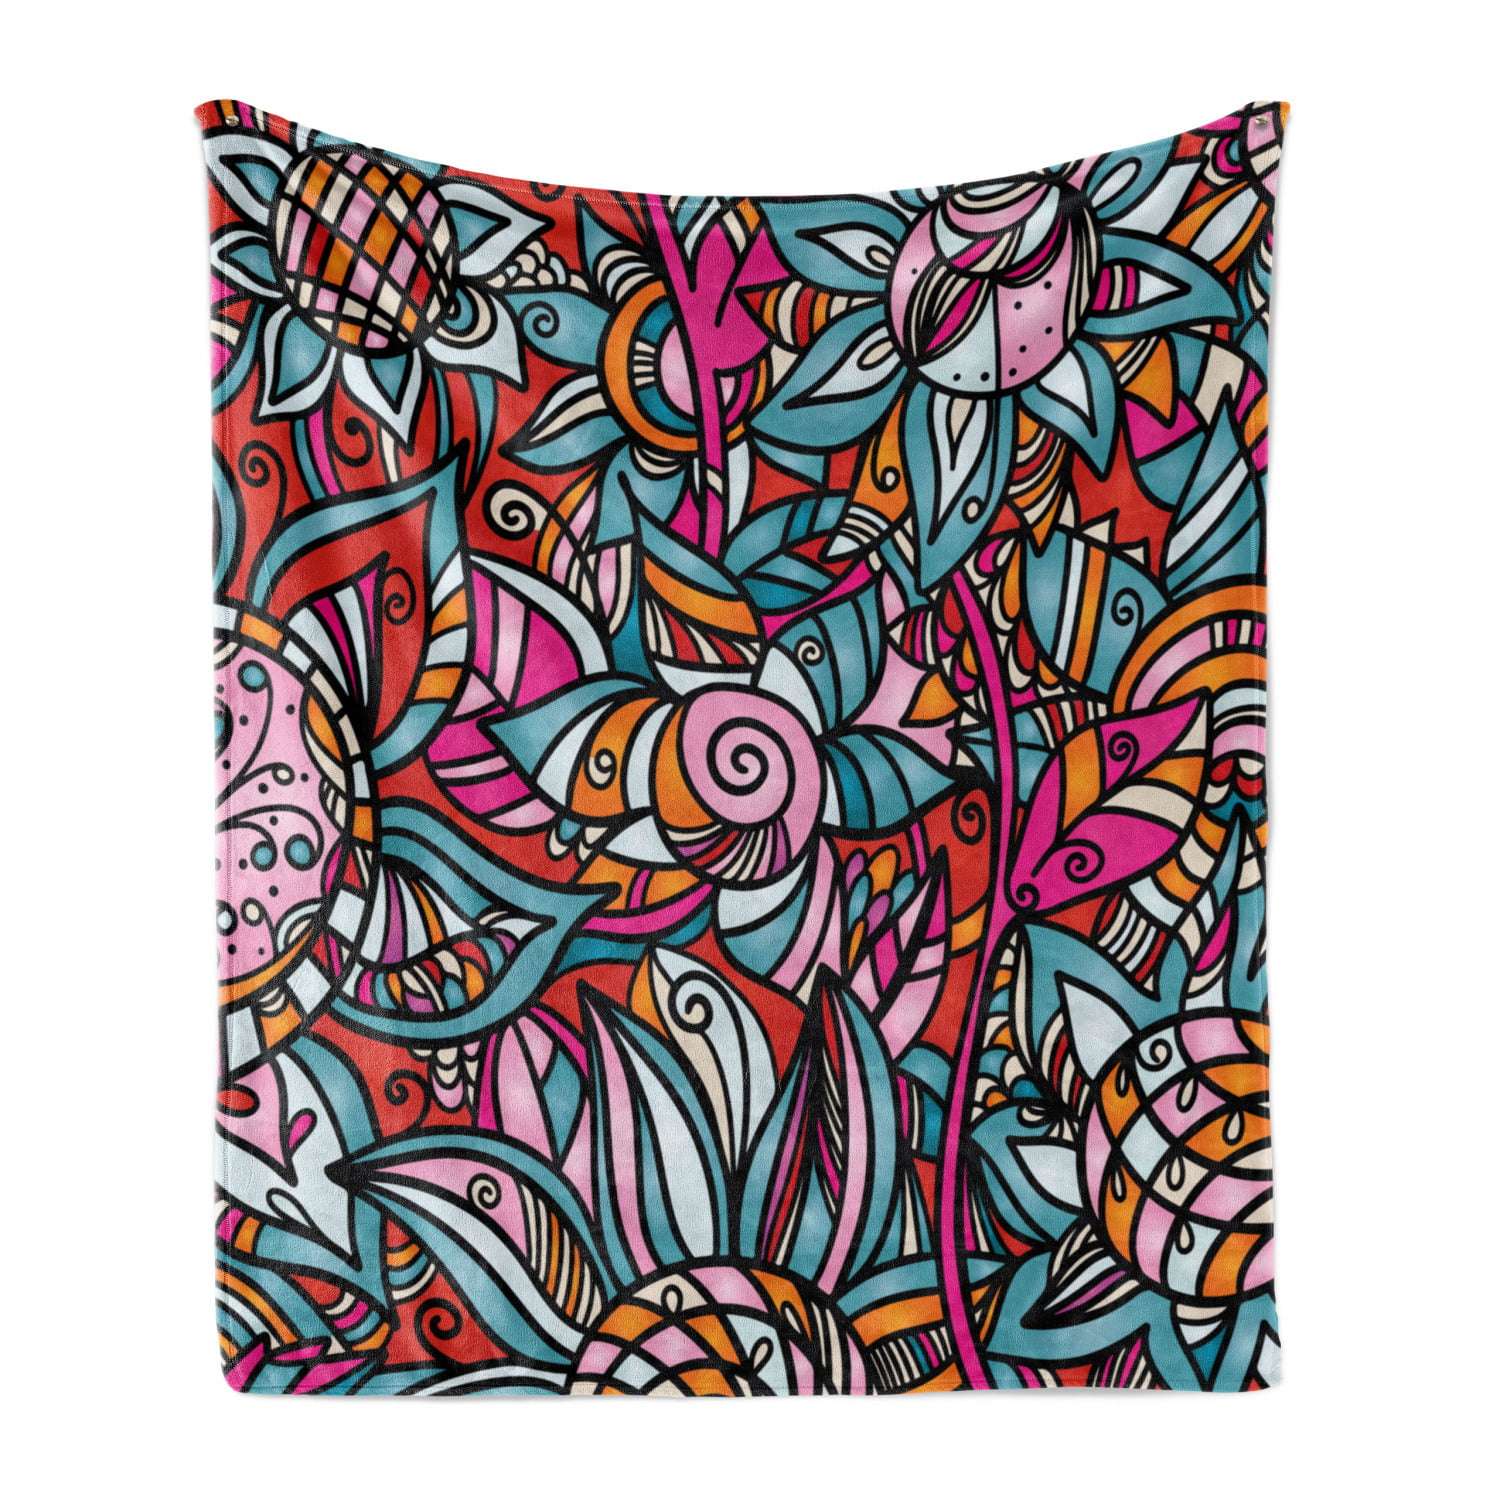 Cozy Plush for Indoor and Outdoor Use 50 x 60 Ambesonne Urban Graffiti Soft Flannel Fleece Throw Blanket Multicolor Abstract Graffiti of Shaded Floral Design Style Overlapping Flowers